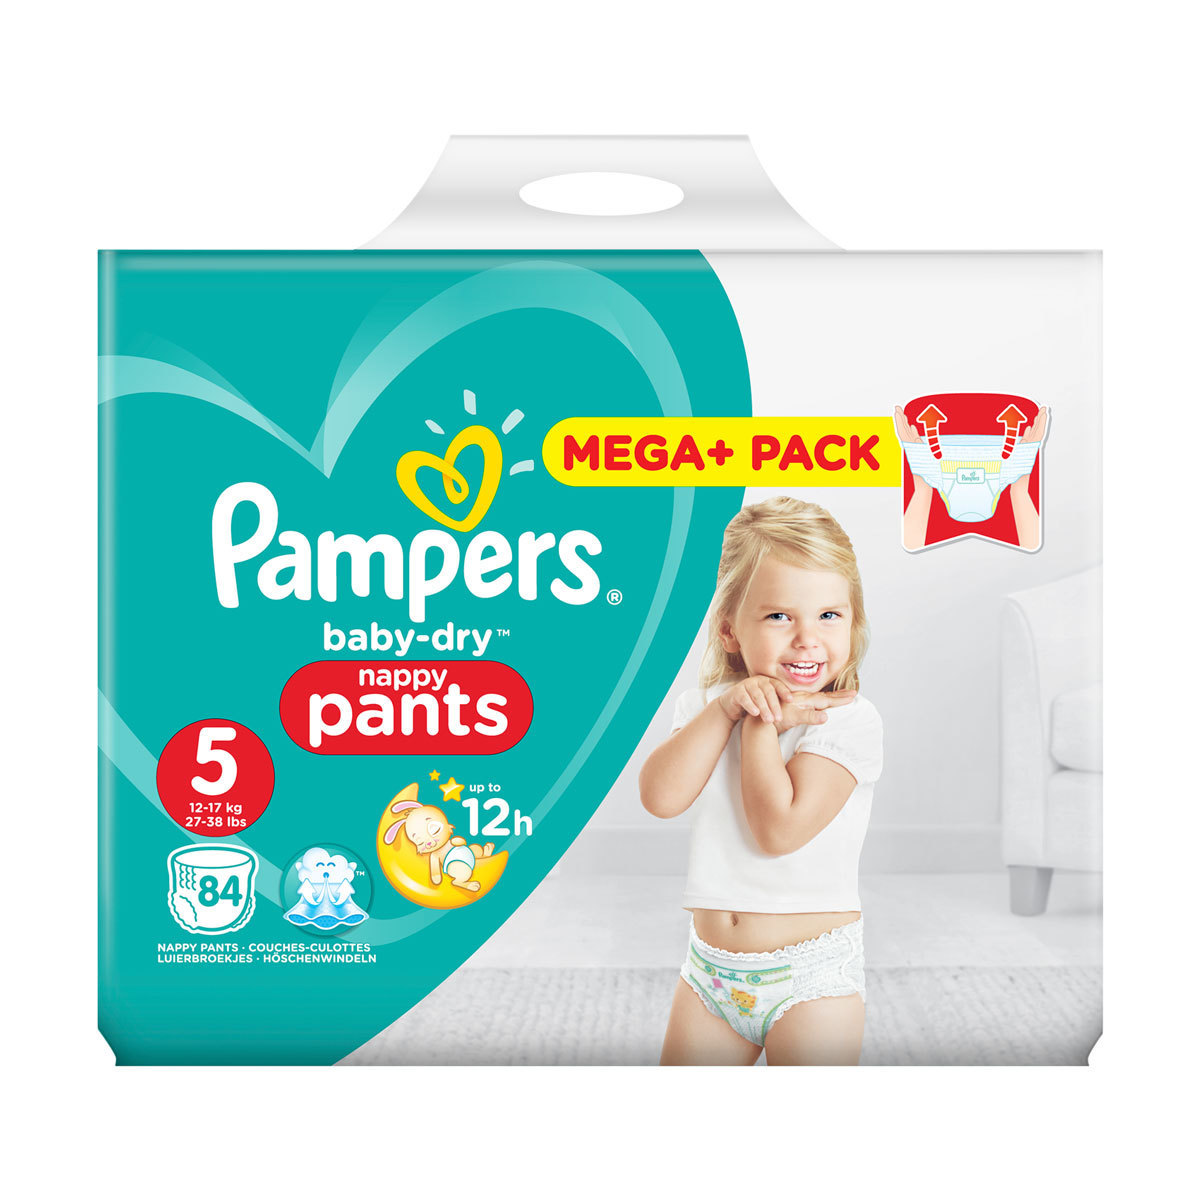 Pampers Nappy Sizes Chart Uk